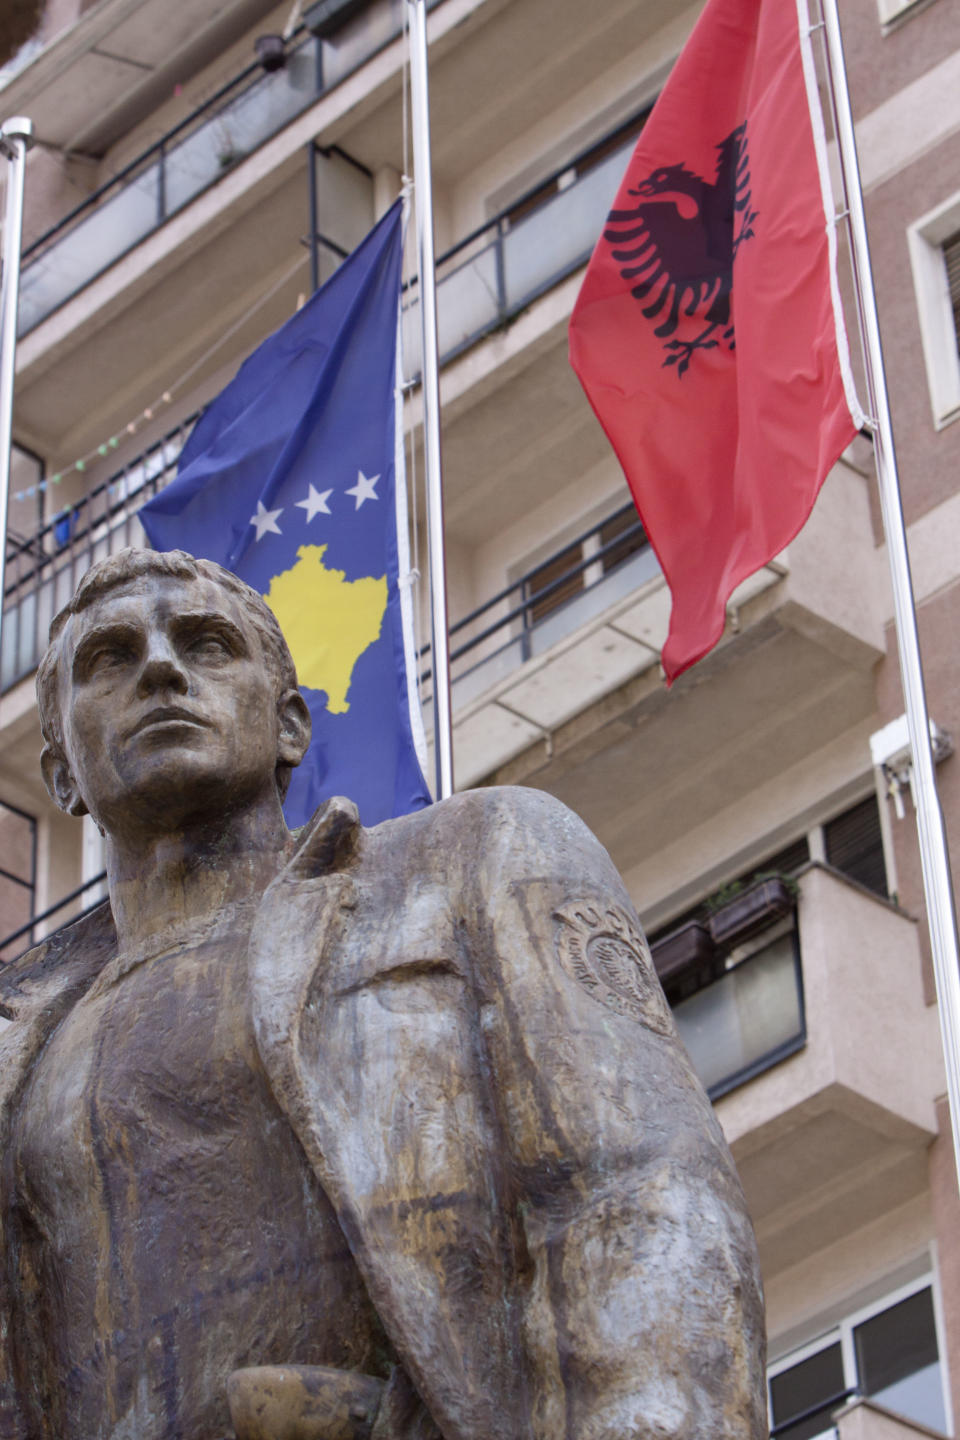 Kosovo and Albanian flags tower over a bronze statue, put up in memory of a Kosovo Liberation Army member in Kosovo capital Pristina on Friday Apr. 4, 2014. Former guerrillas have dismissed EU plans to set up an international tribunal to try former members of the Kosovo Liberation Army as anti Albanian. (AP Photo/Visar Kryeziu)